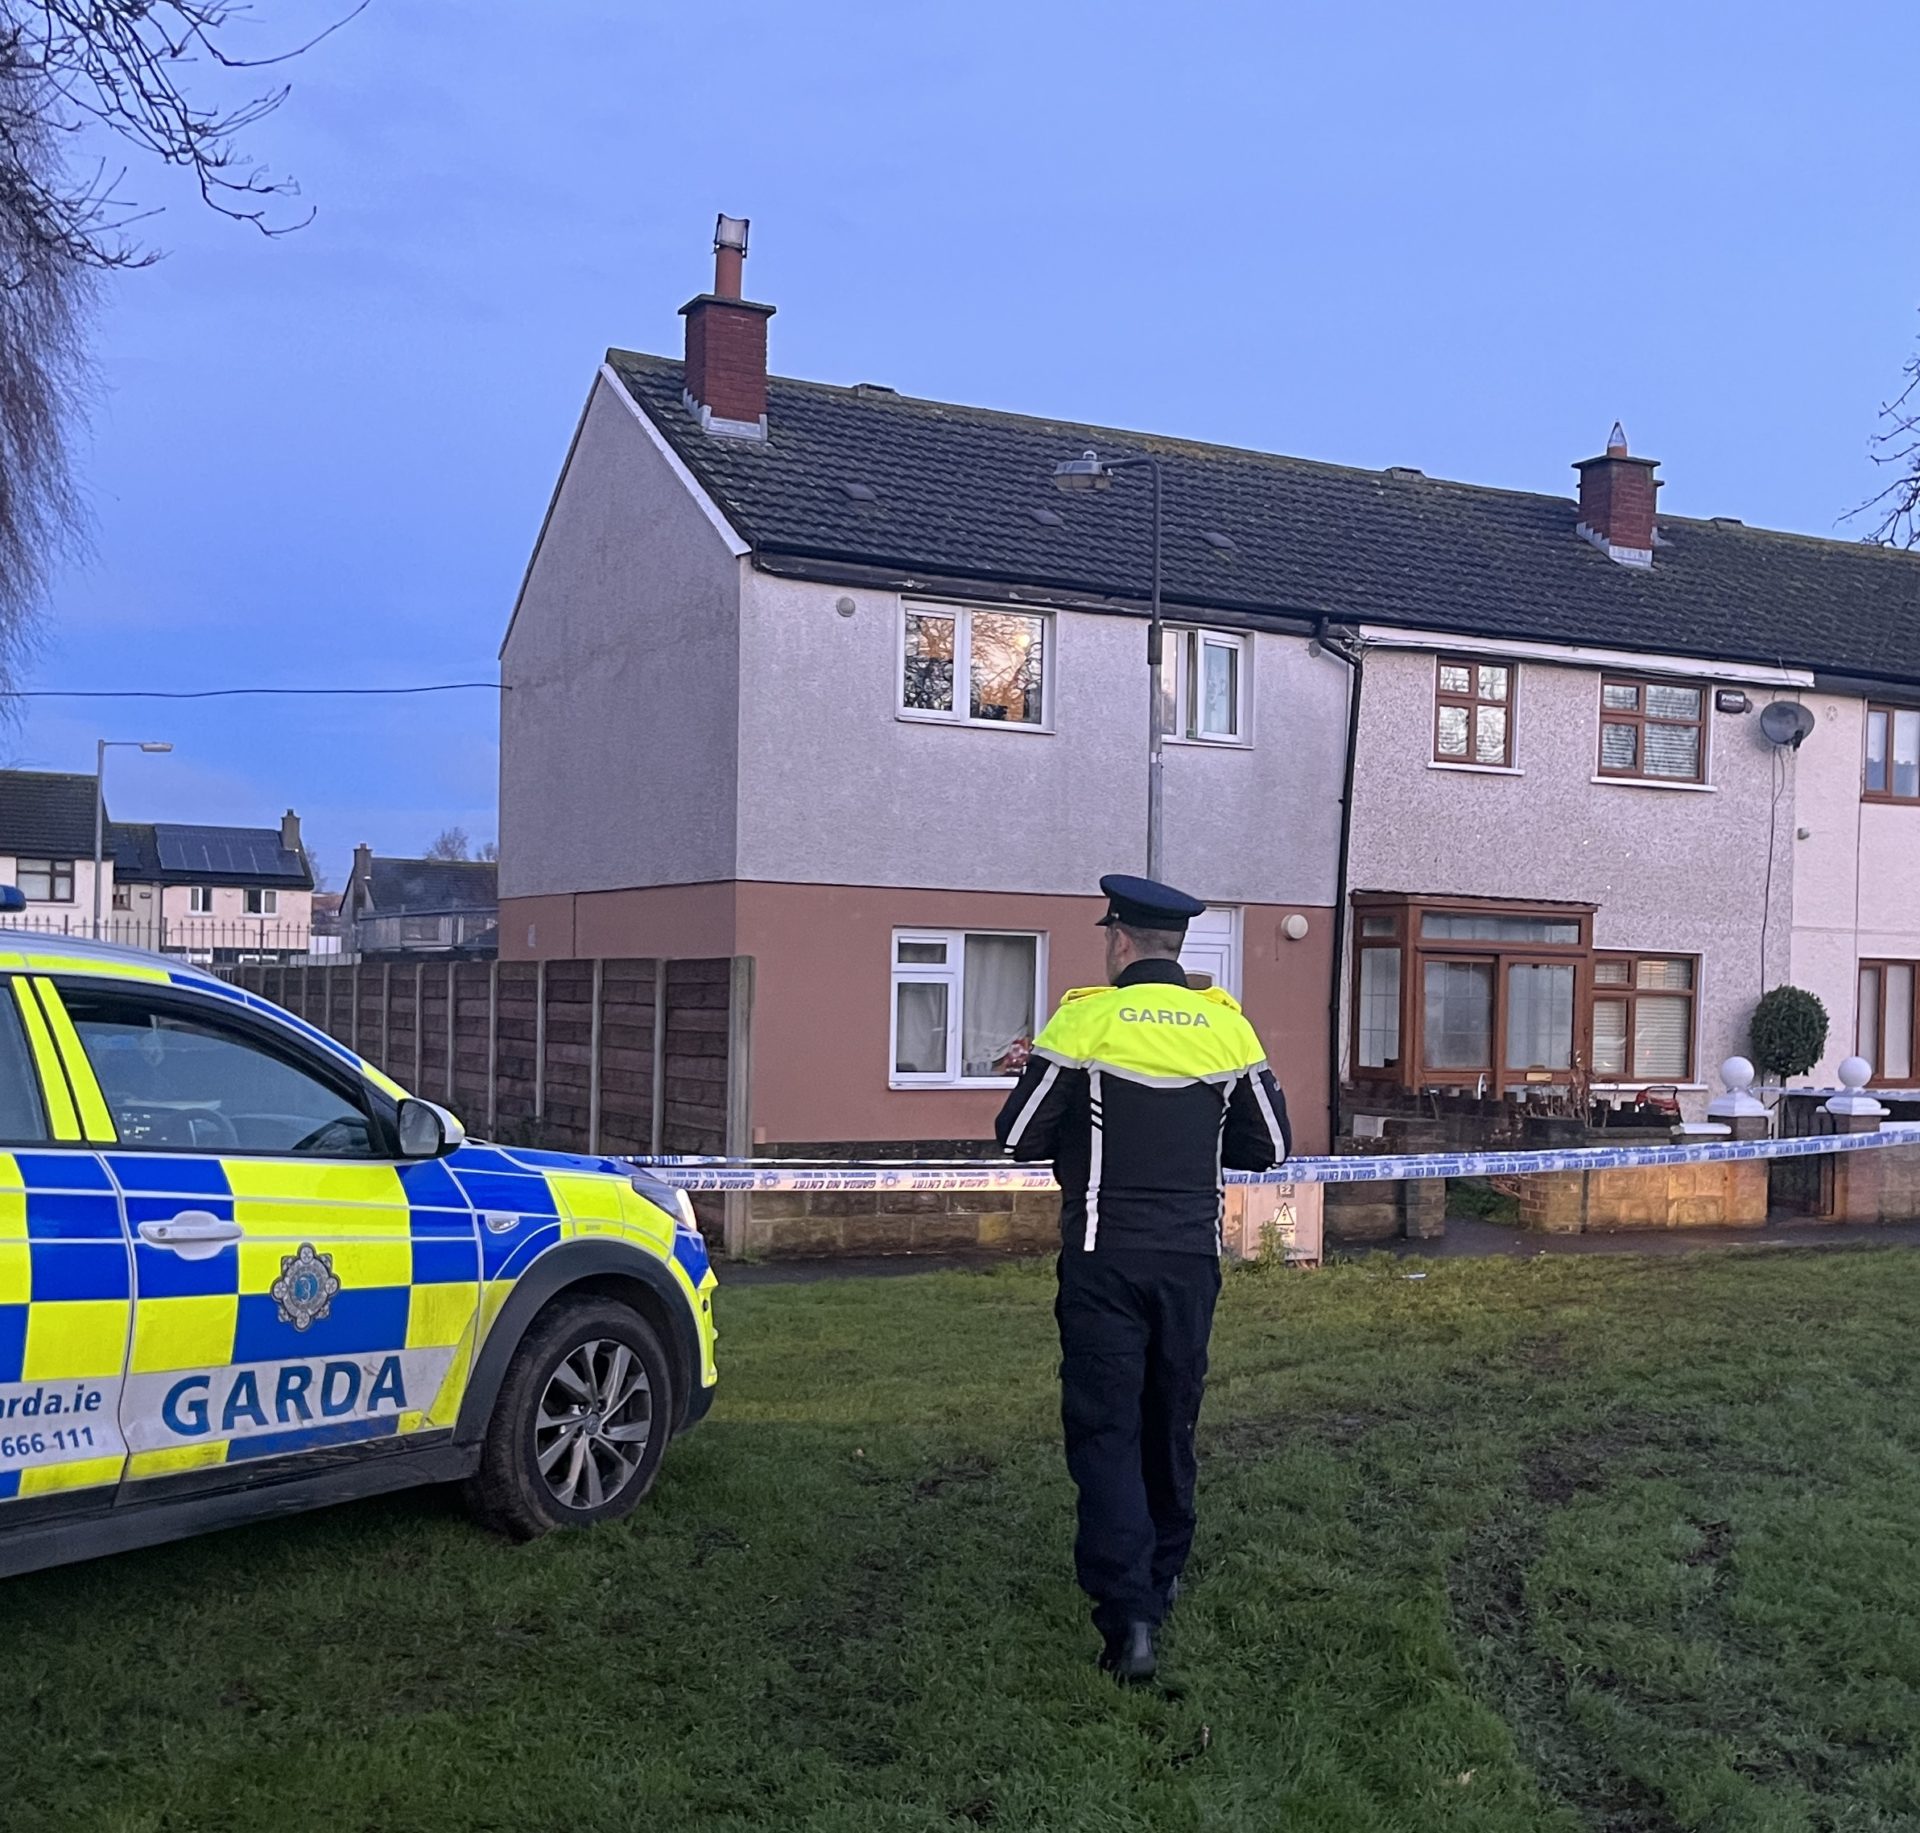 Gardaí at the scene of the killing in the Castle Park area of Tallaght, 12-12-23.